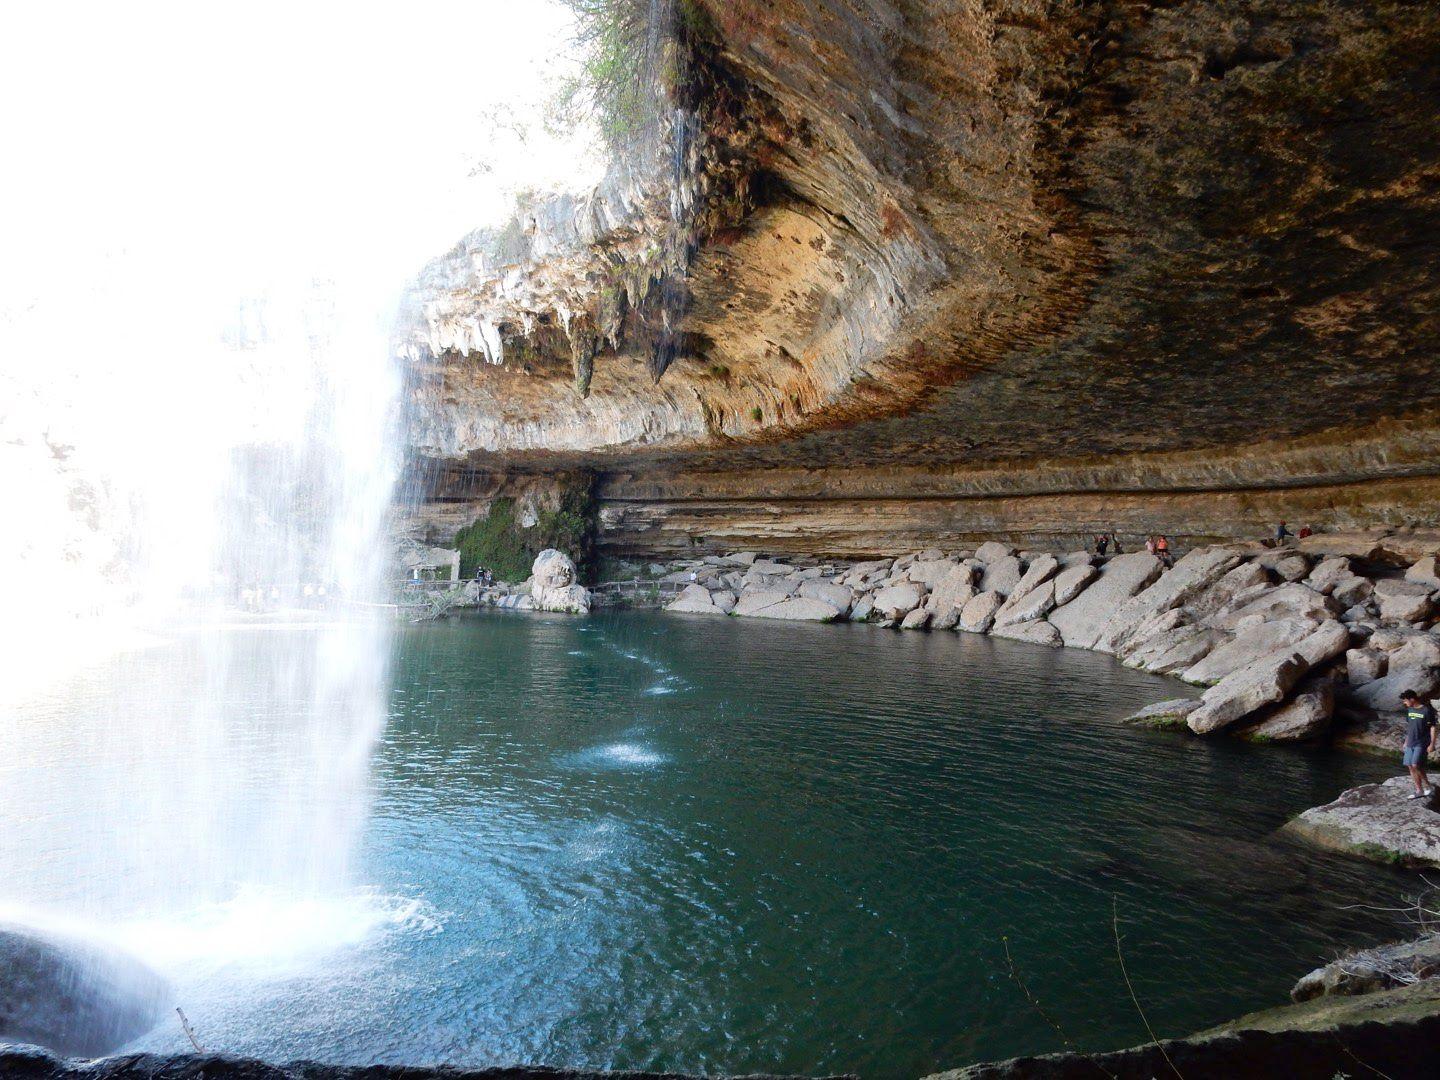 A photo of Hamilton Pool Preserve. A waterfall flows over a rock overhang into a pool of green water down below.